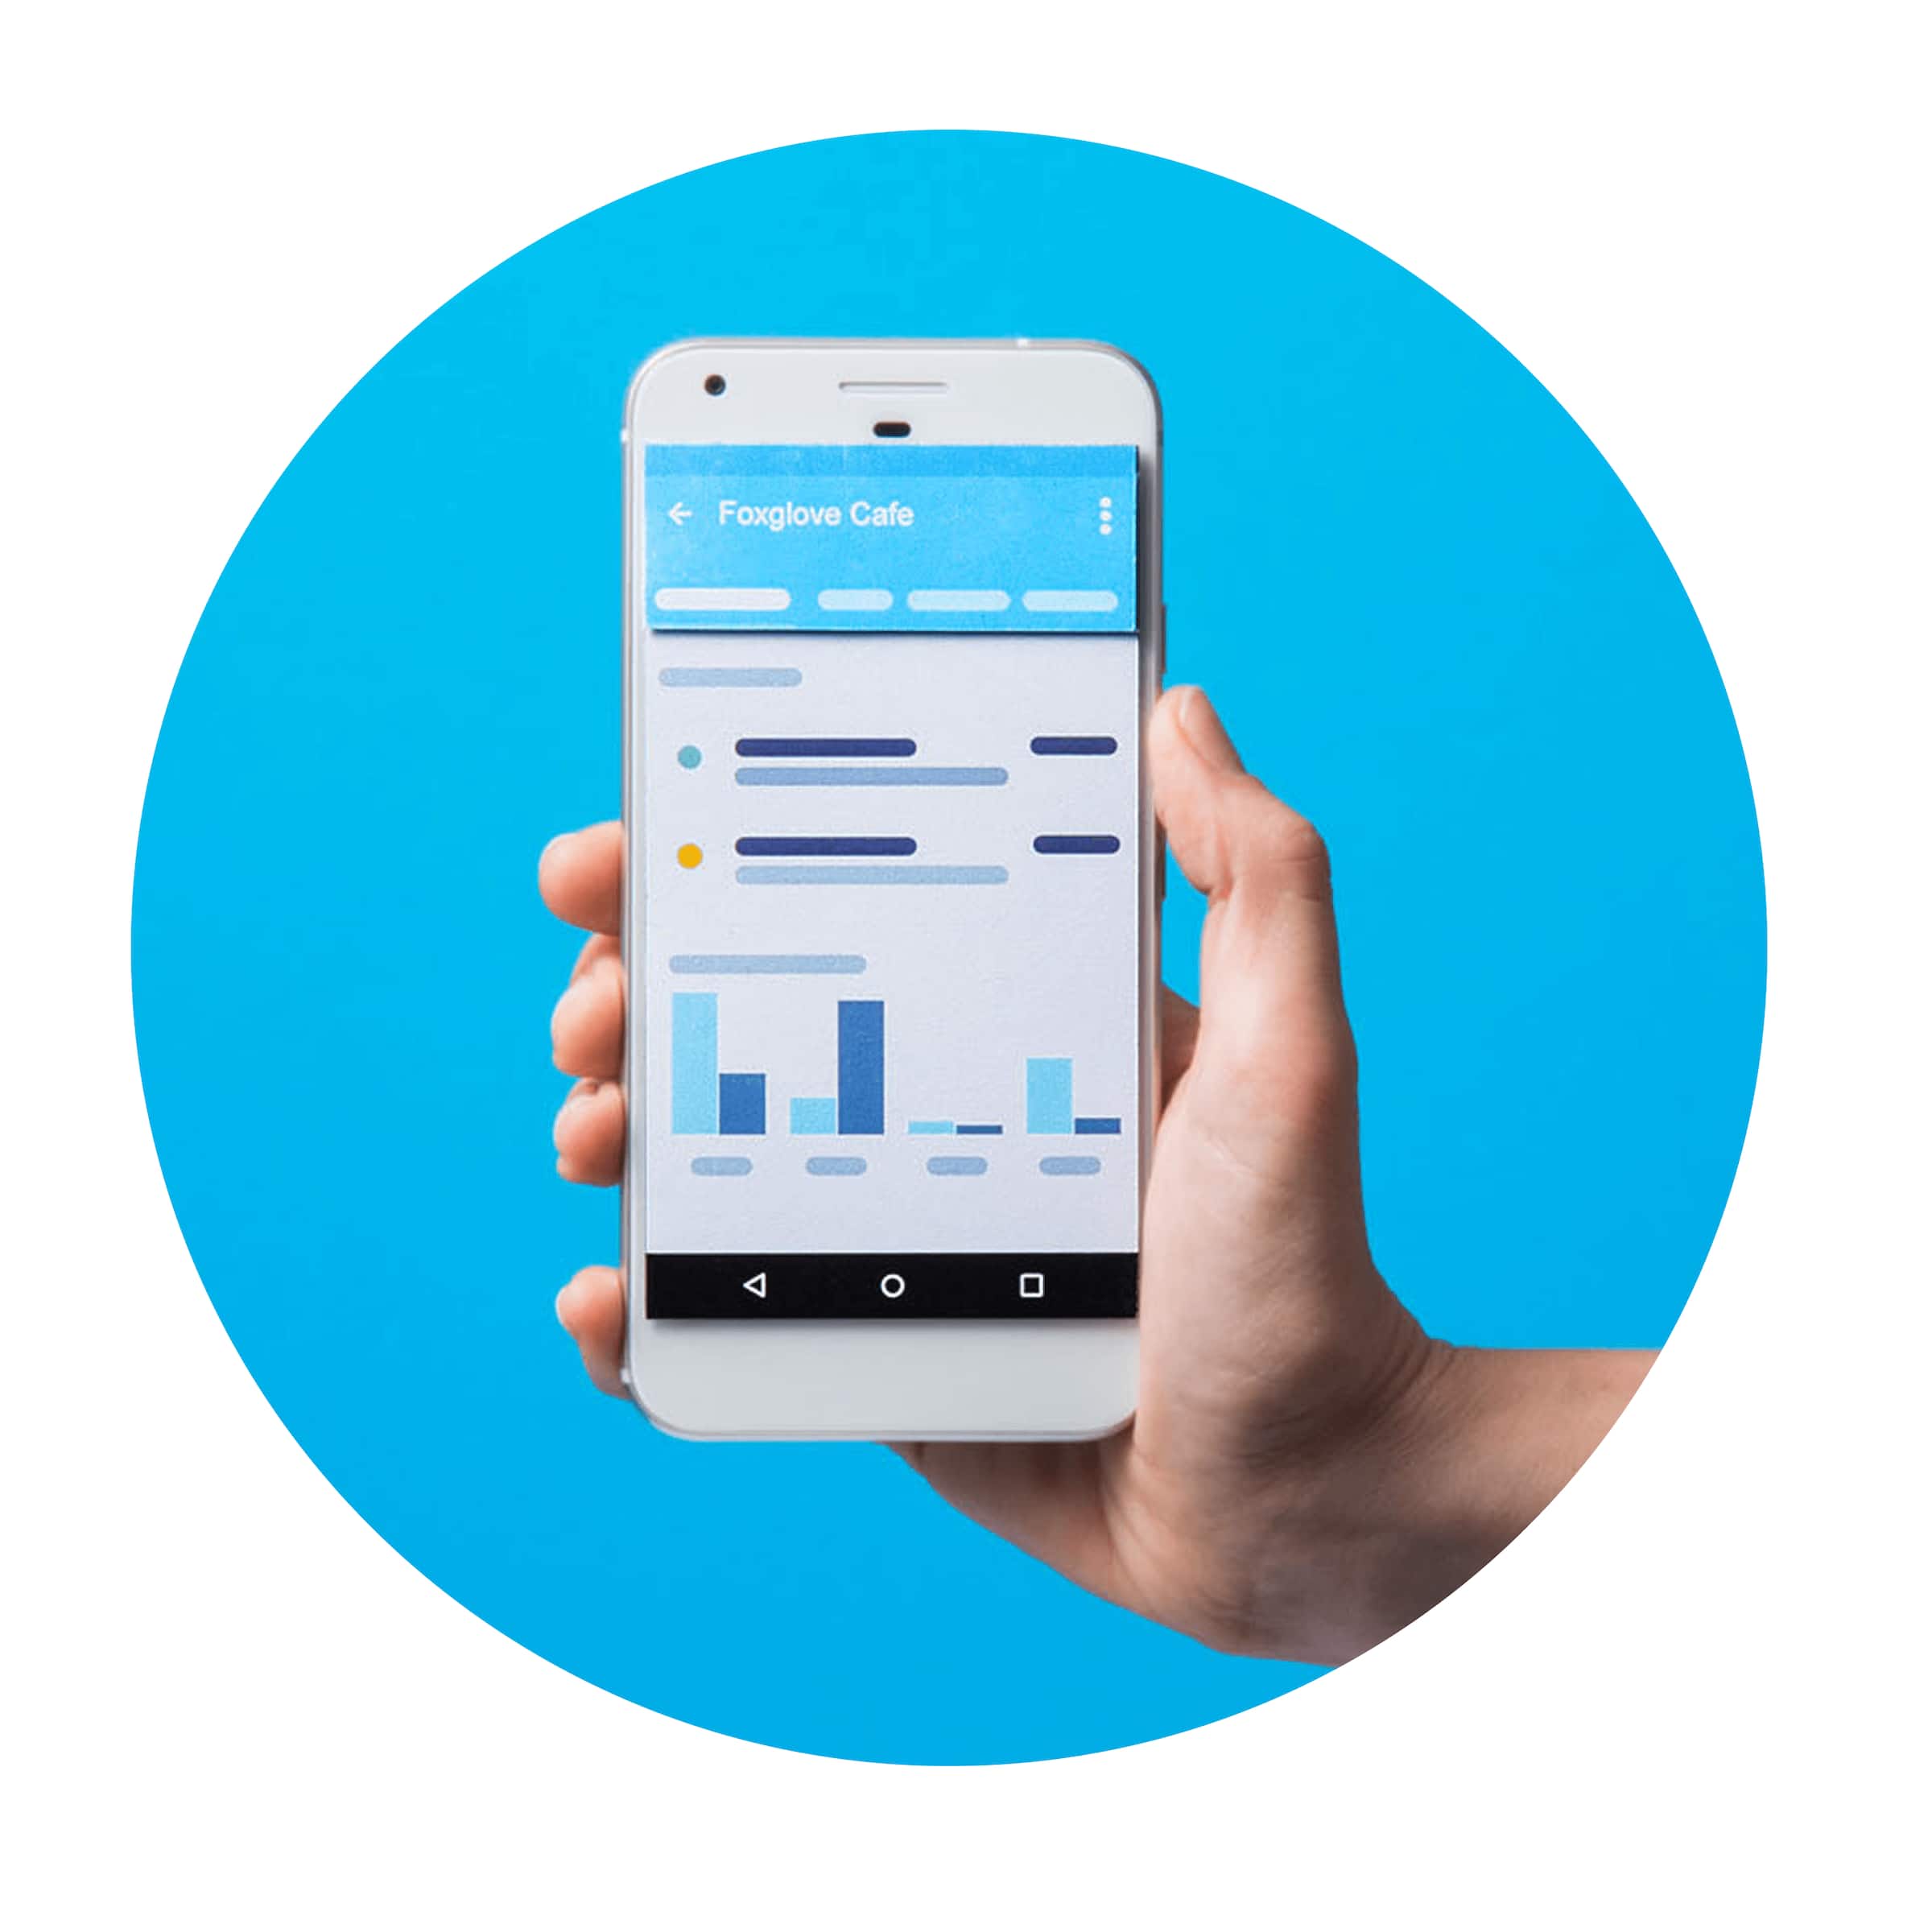 Xero’s mobile accounting app lets retailers track their business on the go.